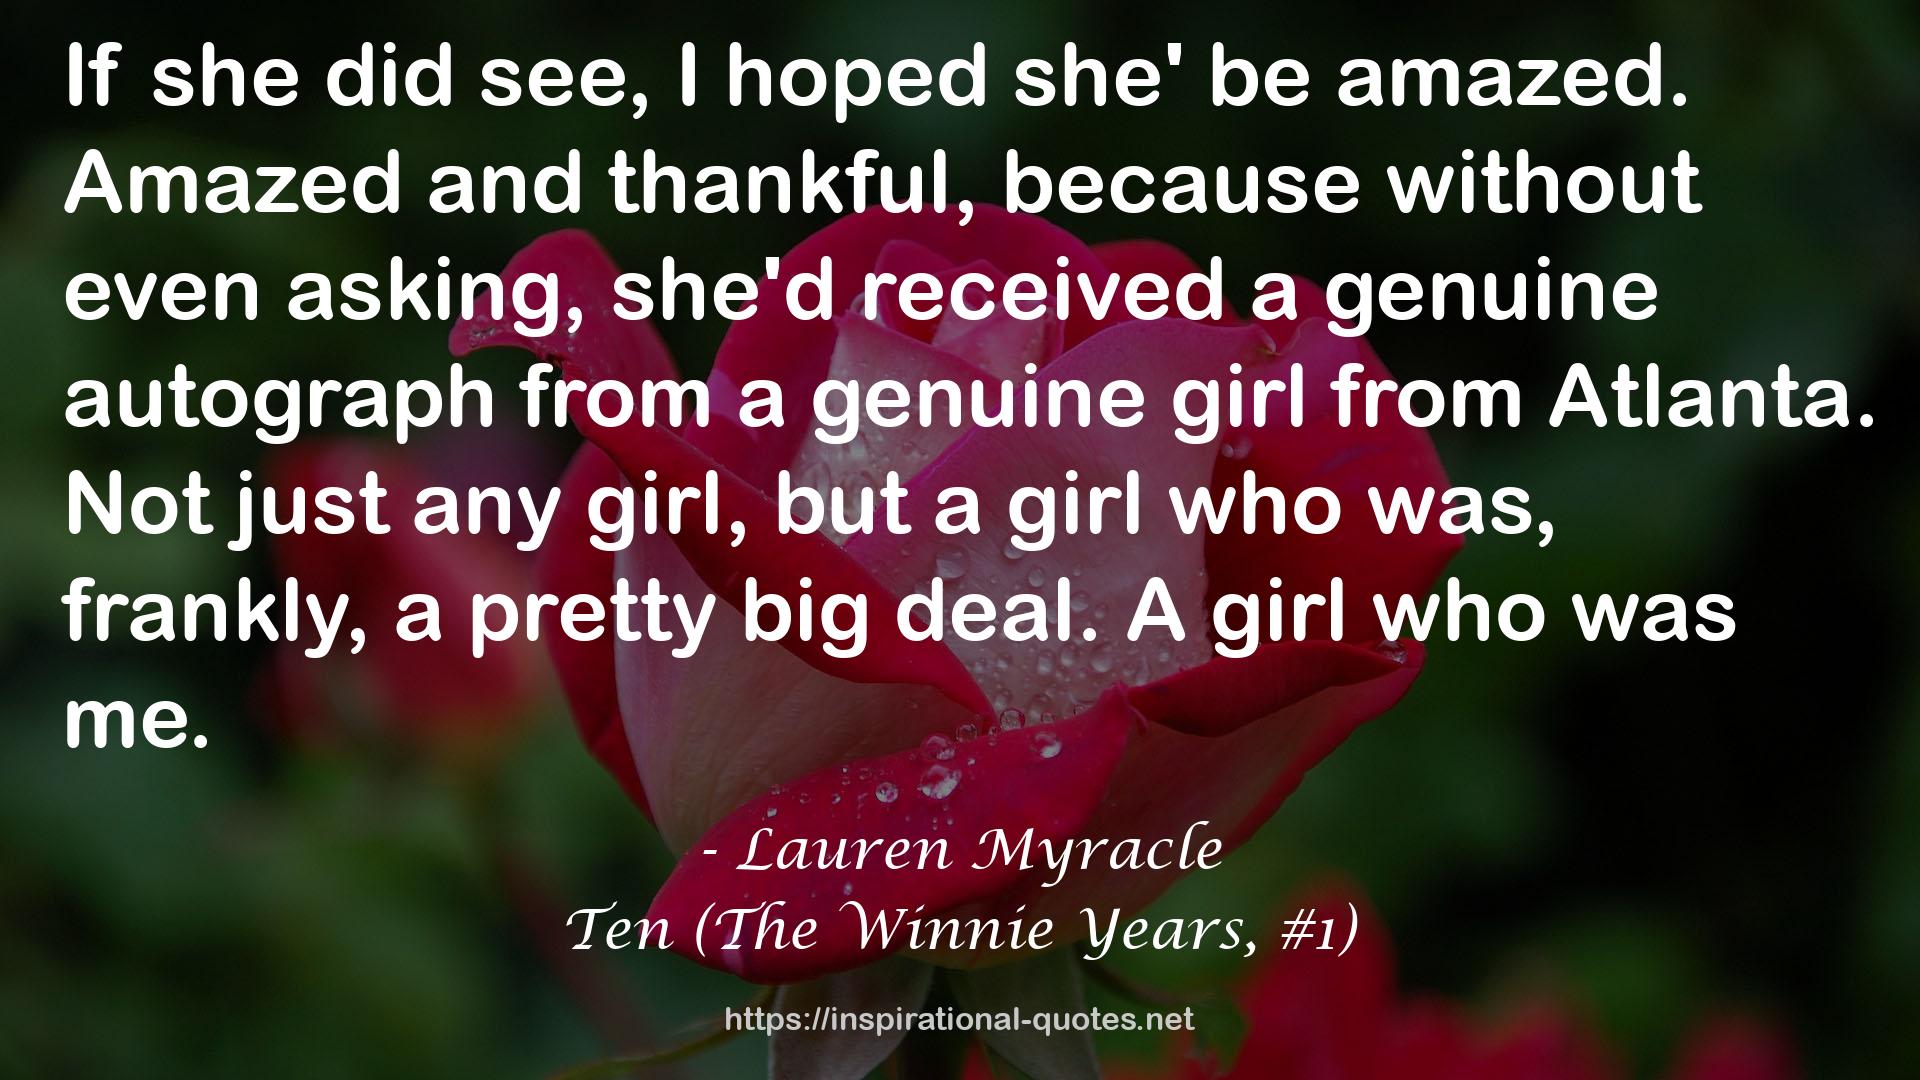 Ten (The Winnie Years, #1) QUOTES